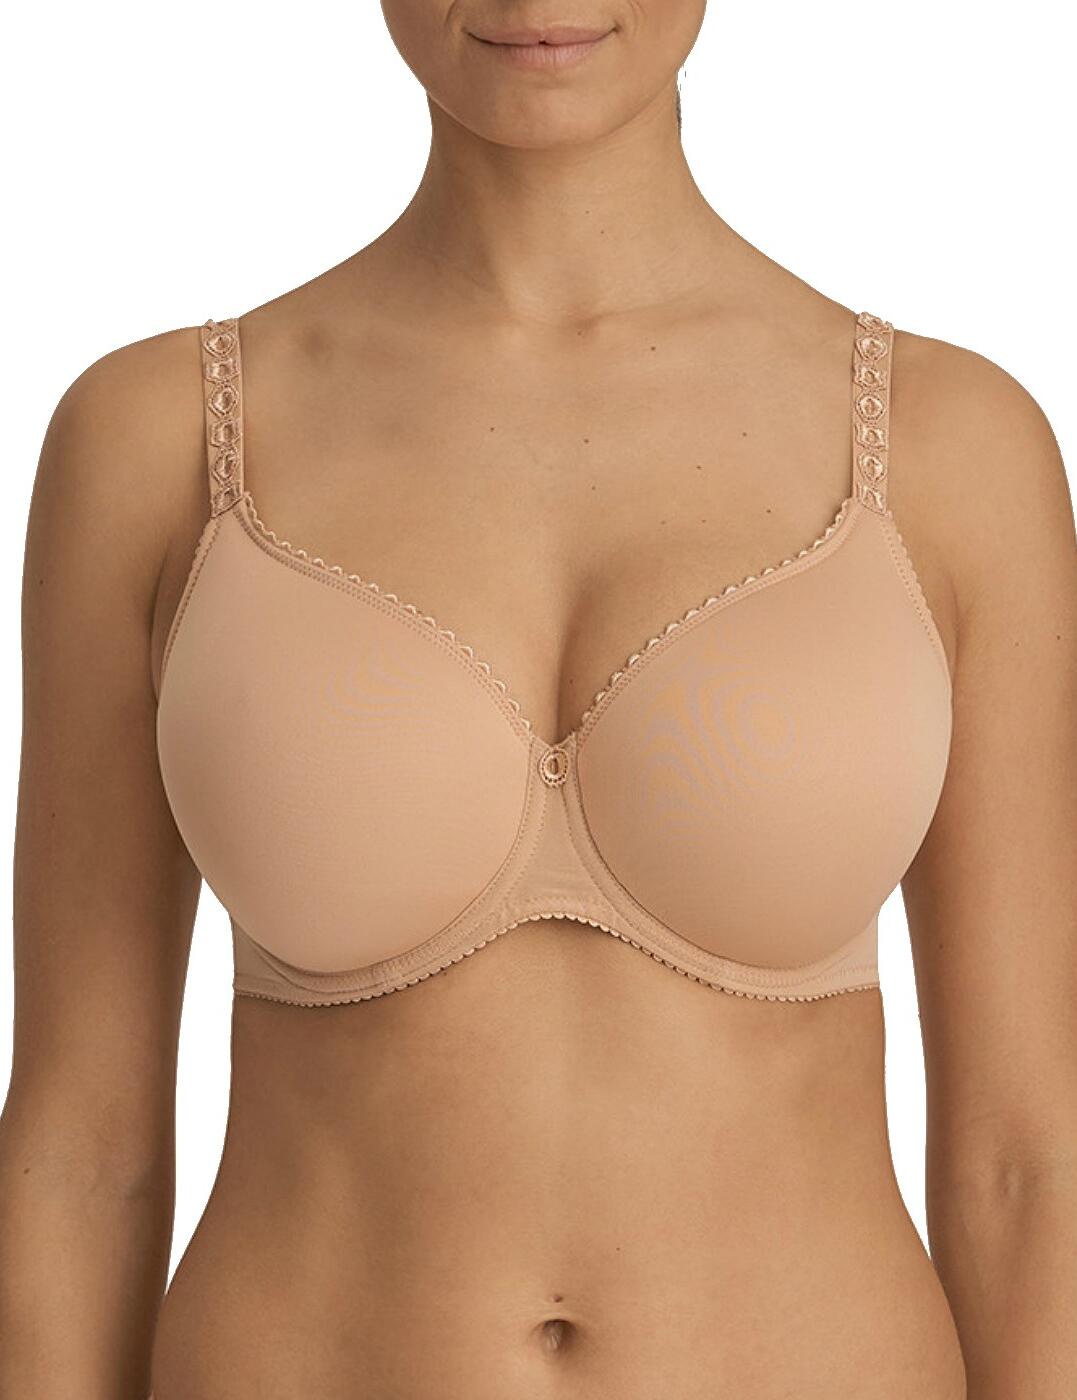 Prima Donna Every Woman Spacer Full Cup Bra Light Tan